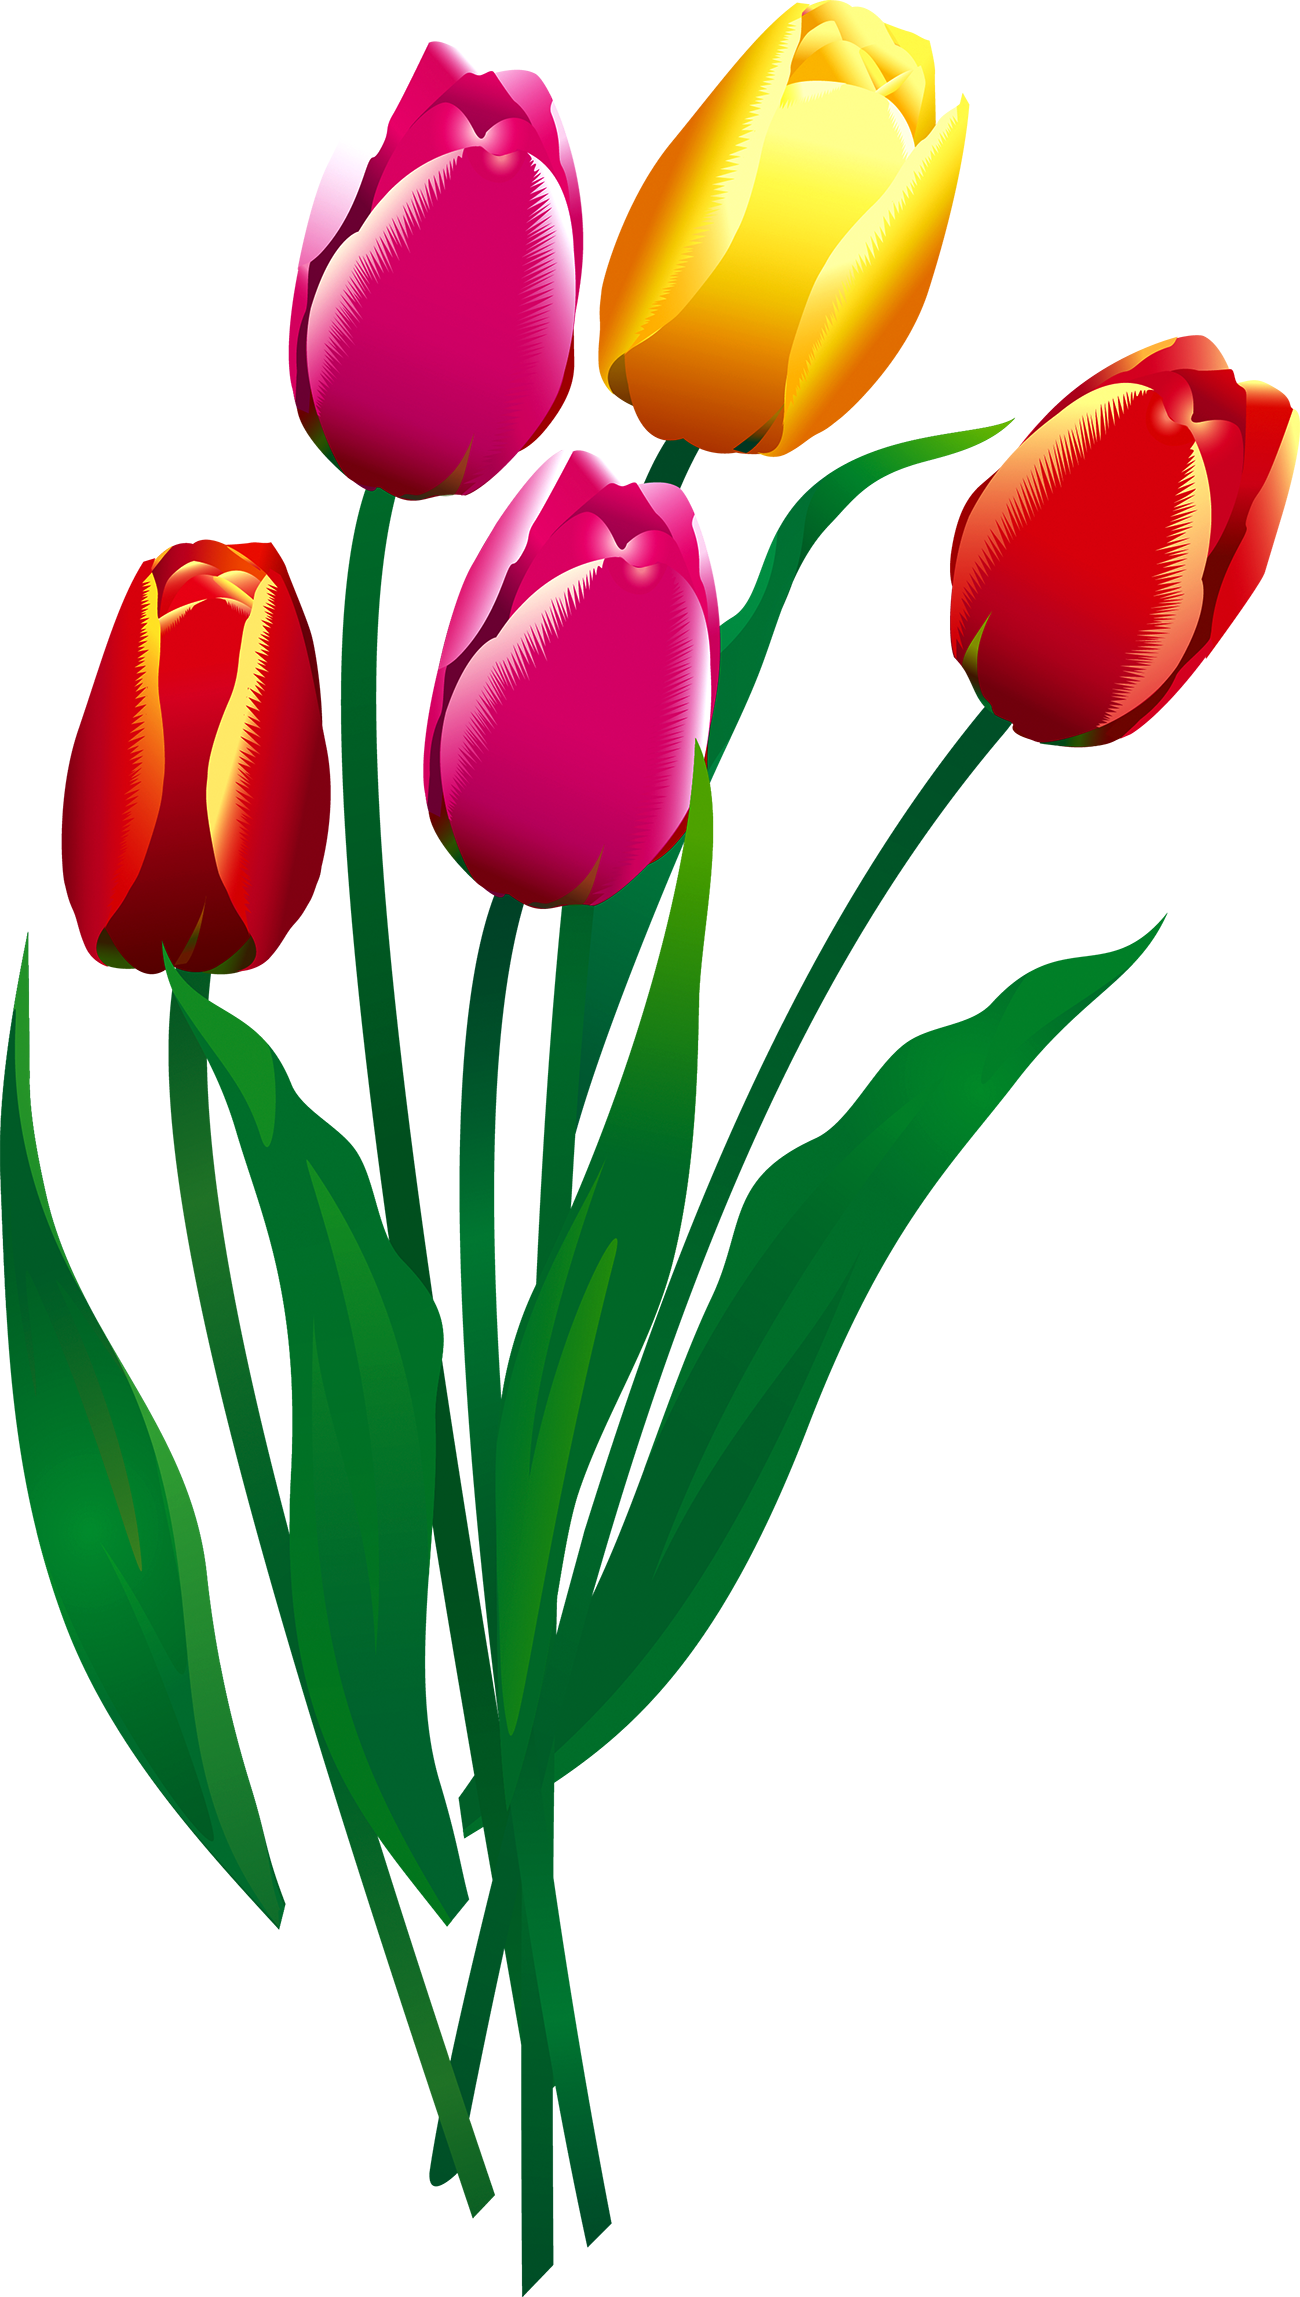 A Group Of Tulips With Green Leaves